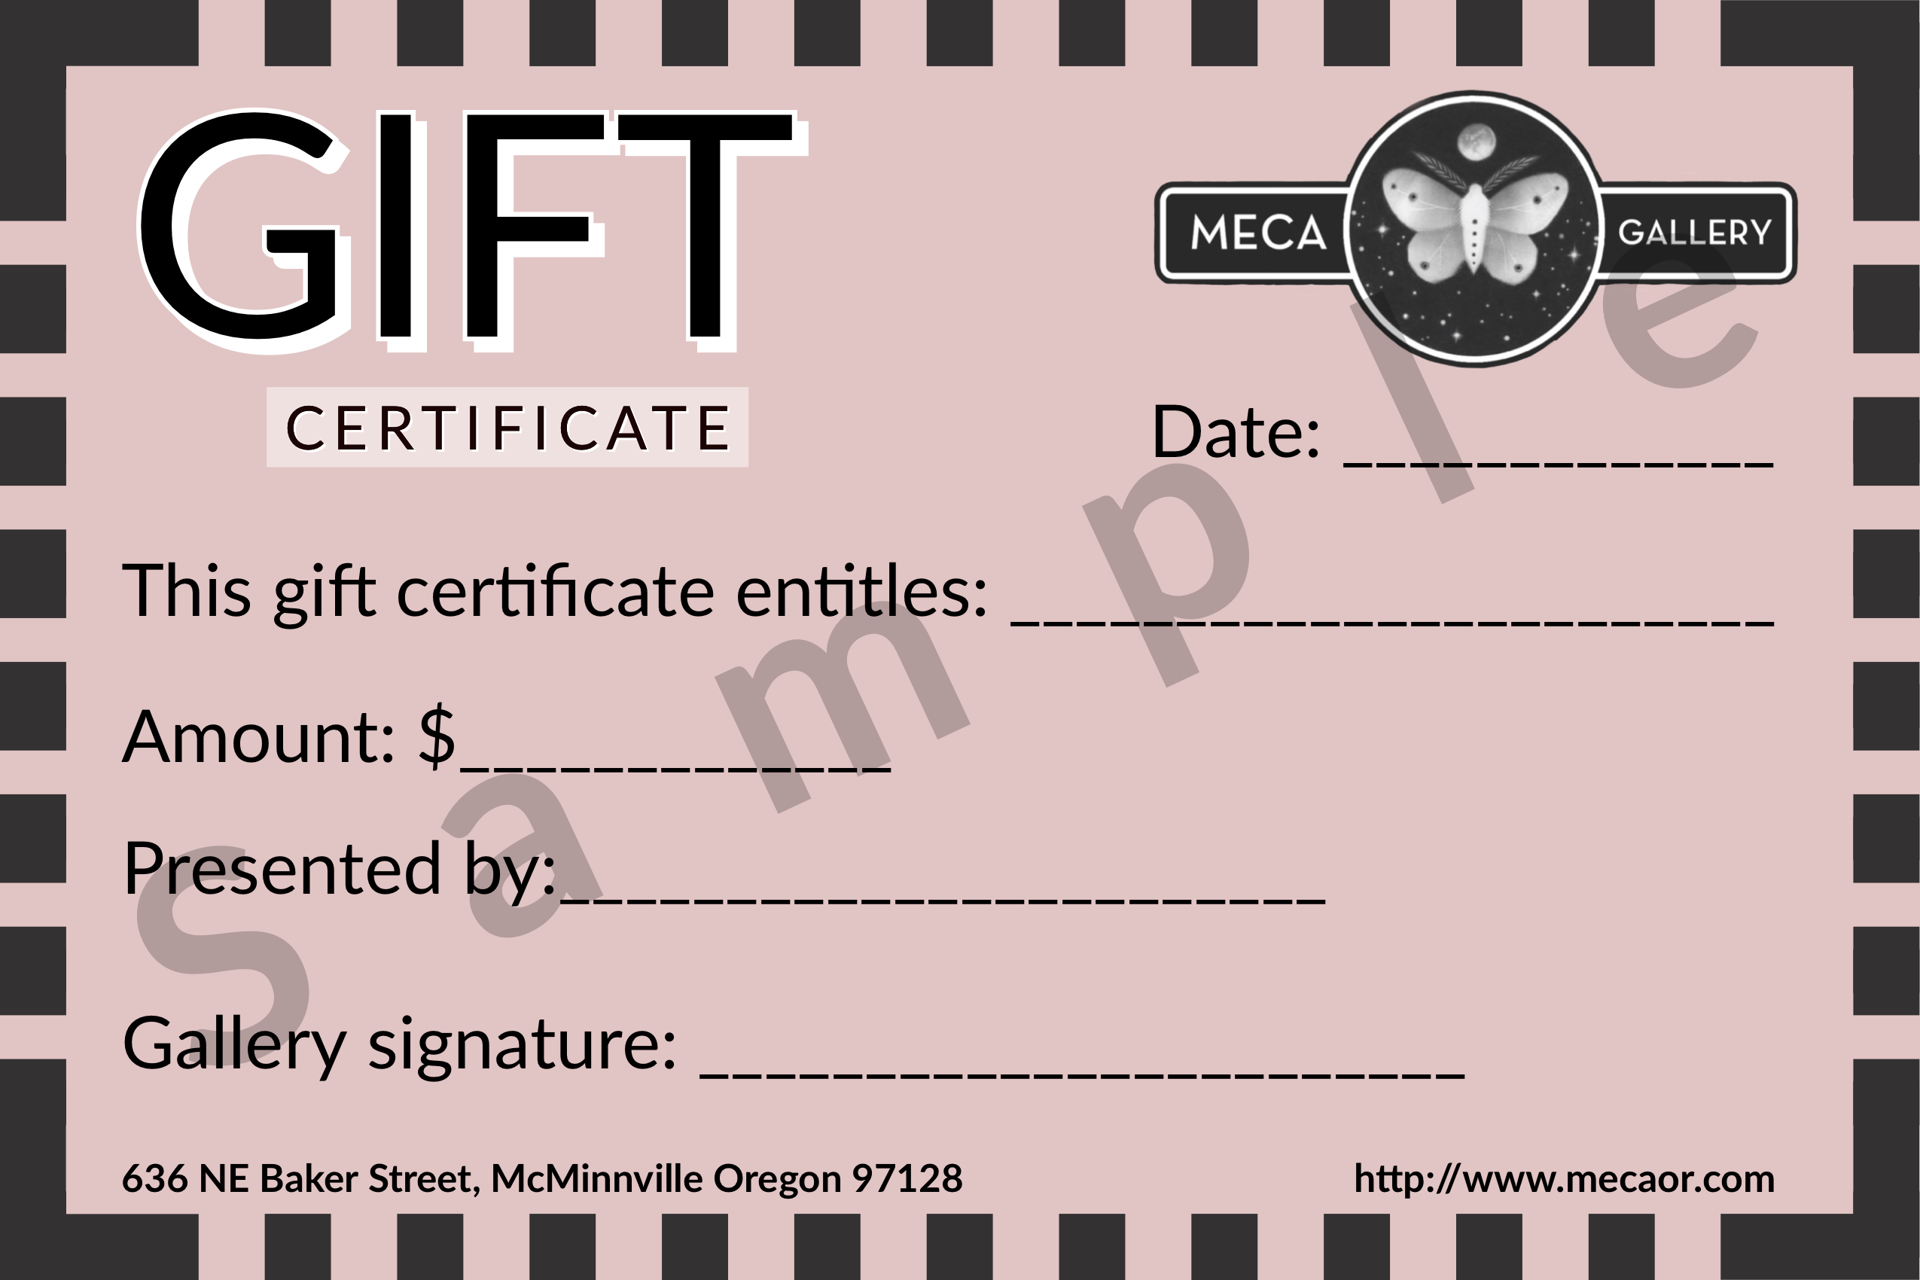 Gift Certificate by Holli Wagner (McMinnville, OR)